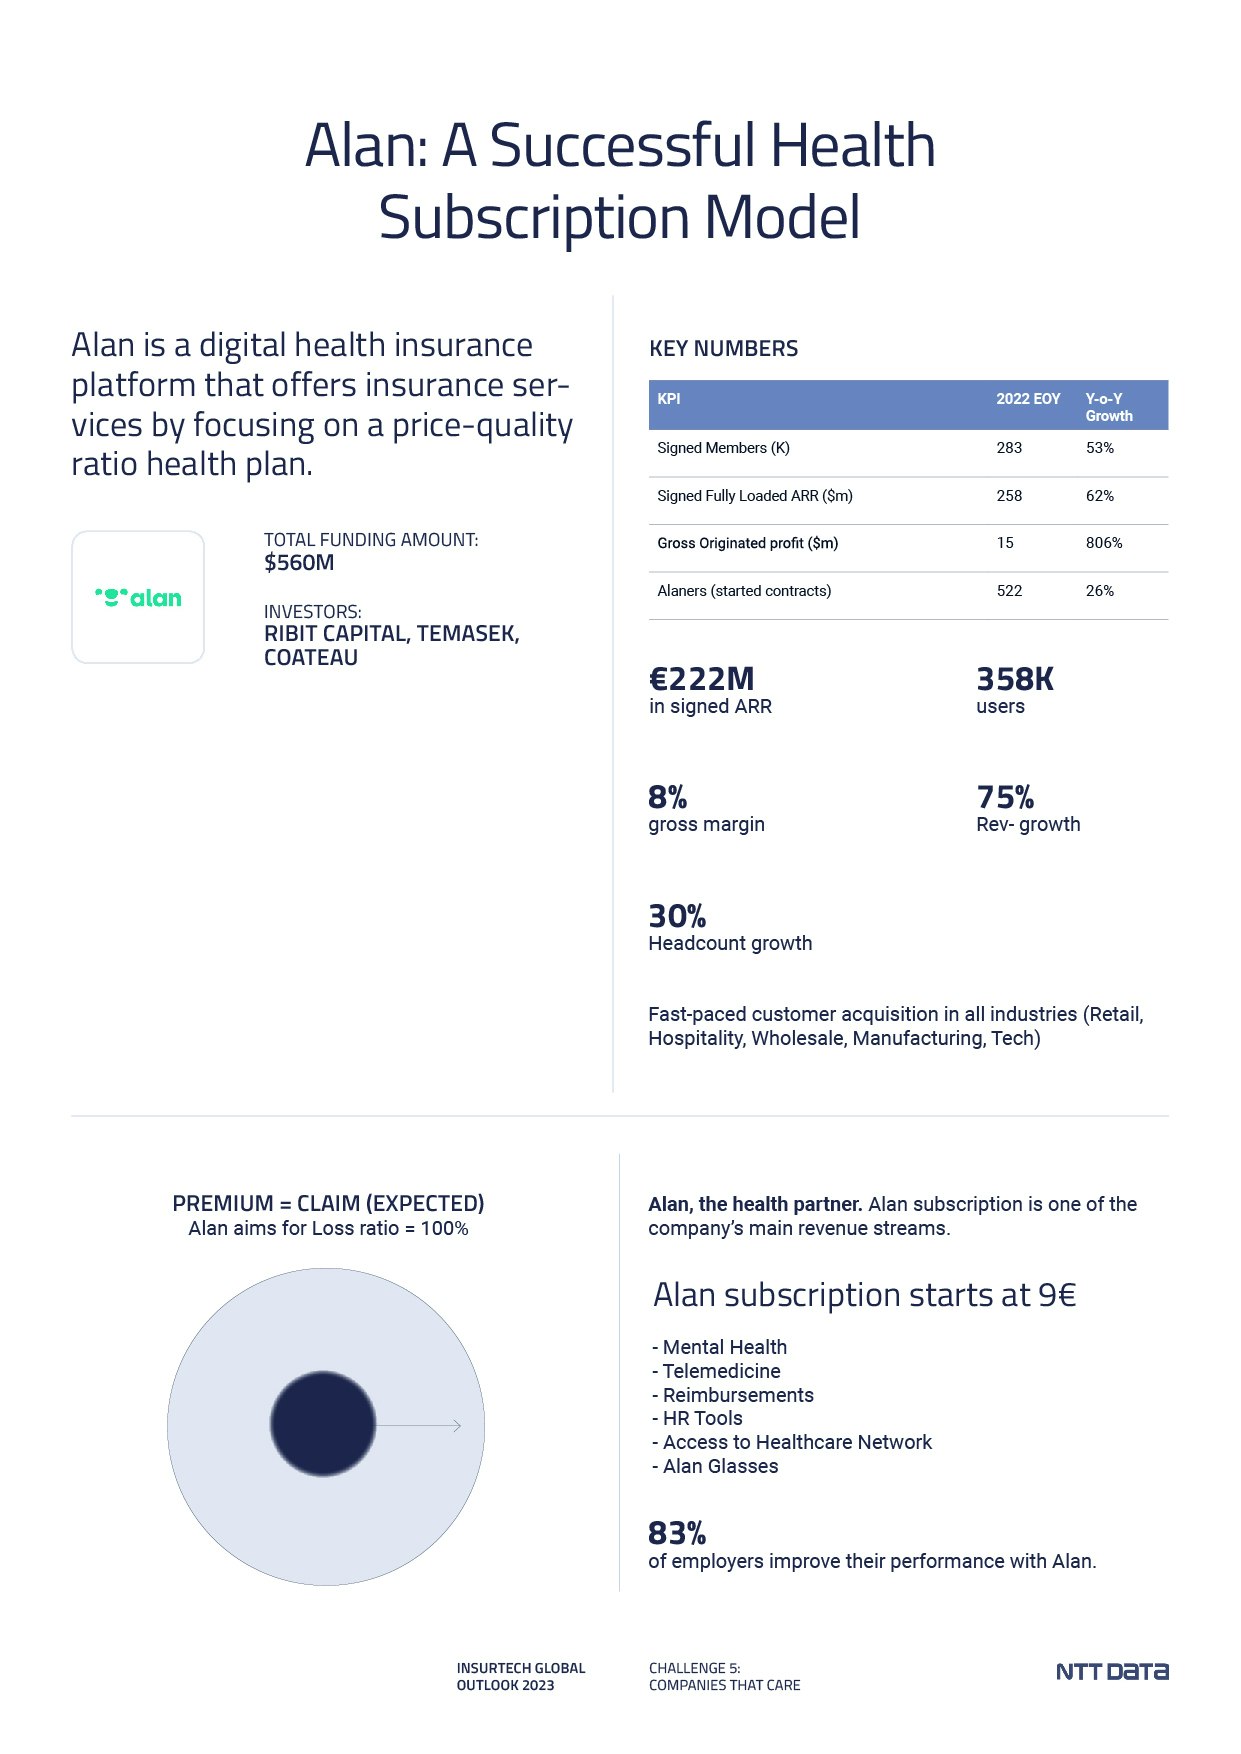 Insurtech Global Outlook – Companies that care 